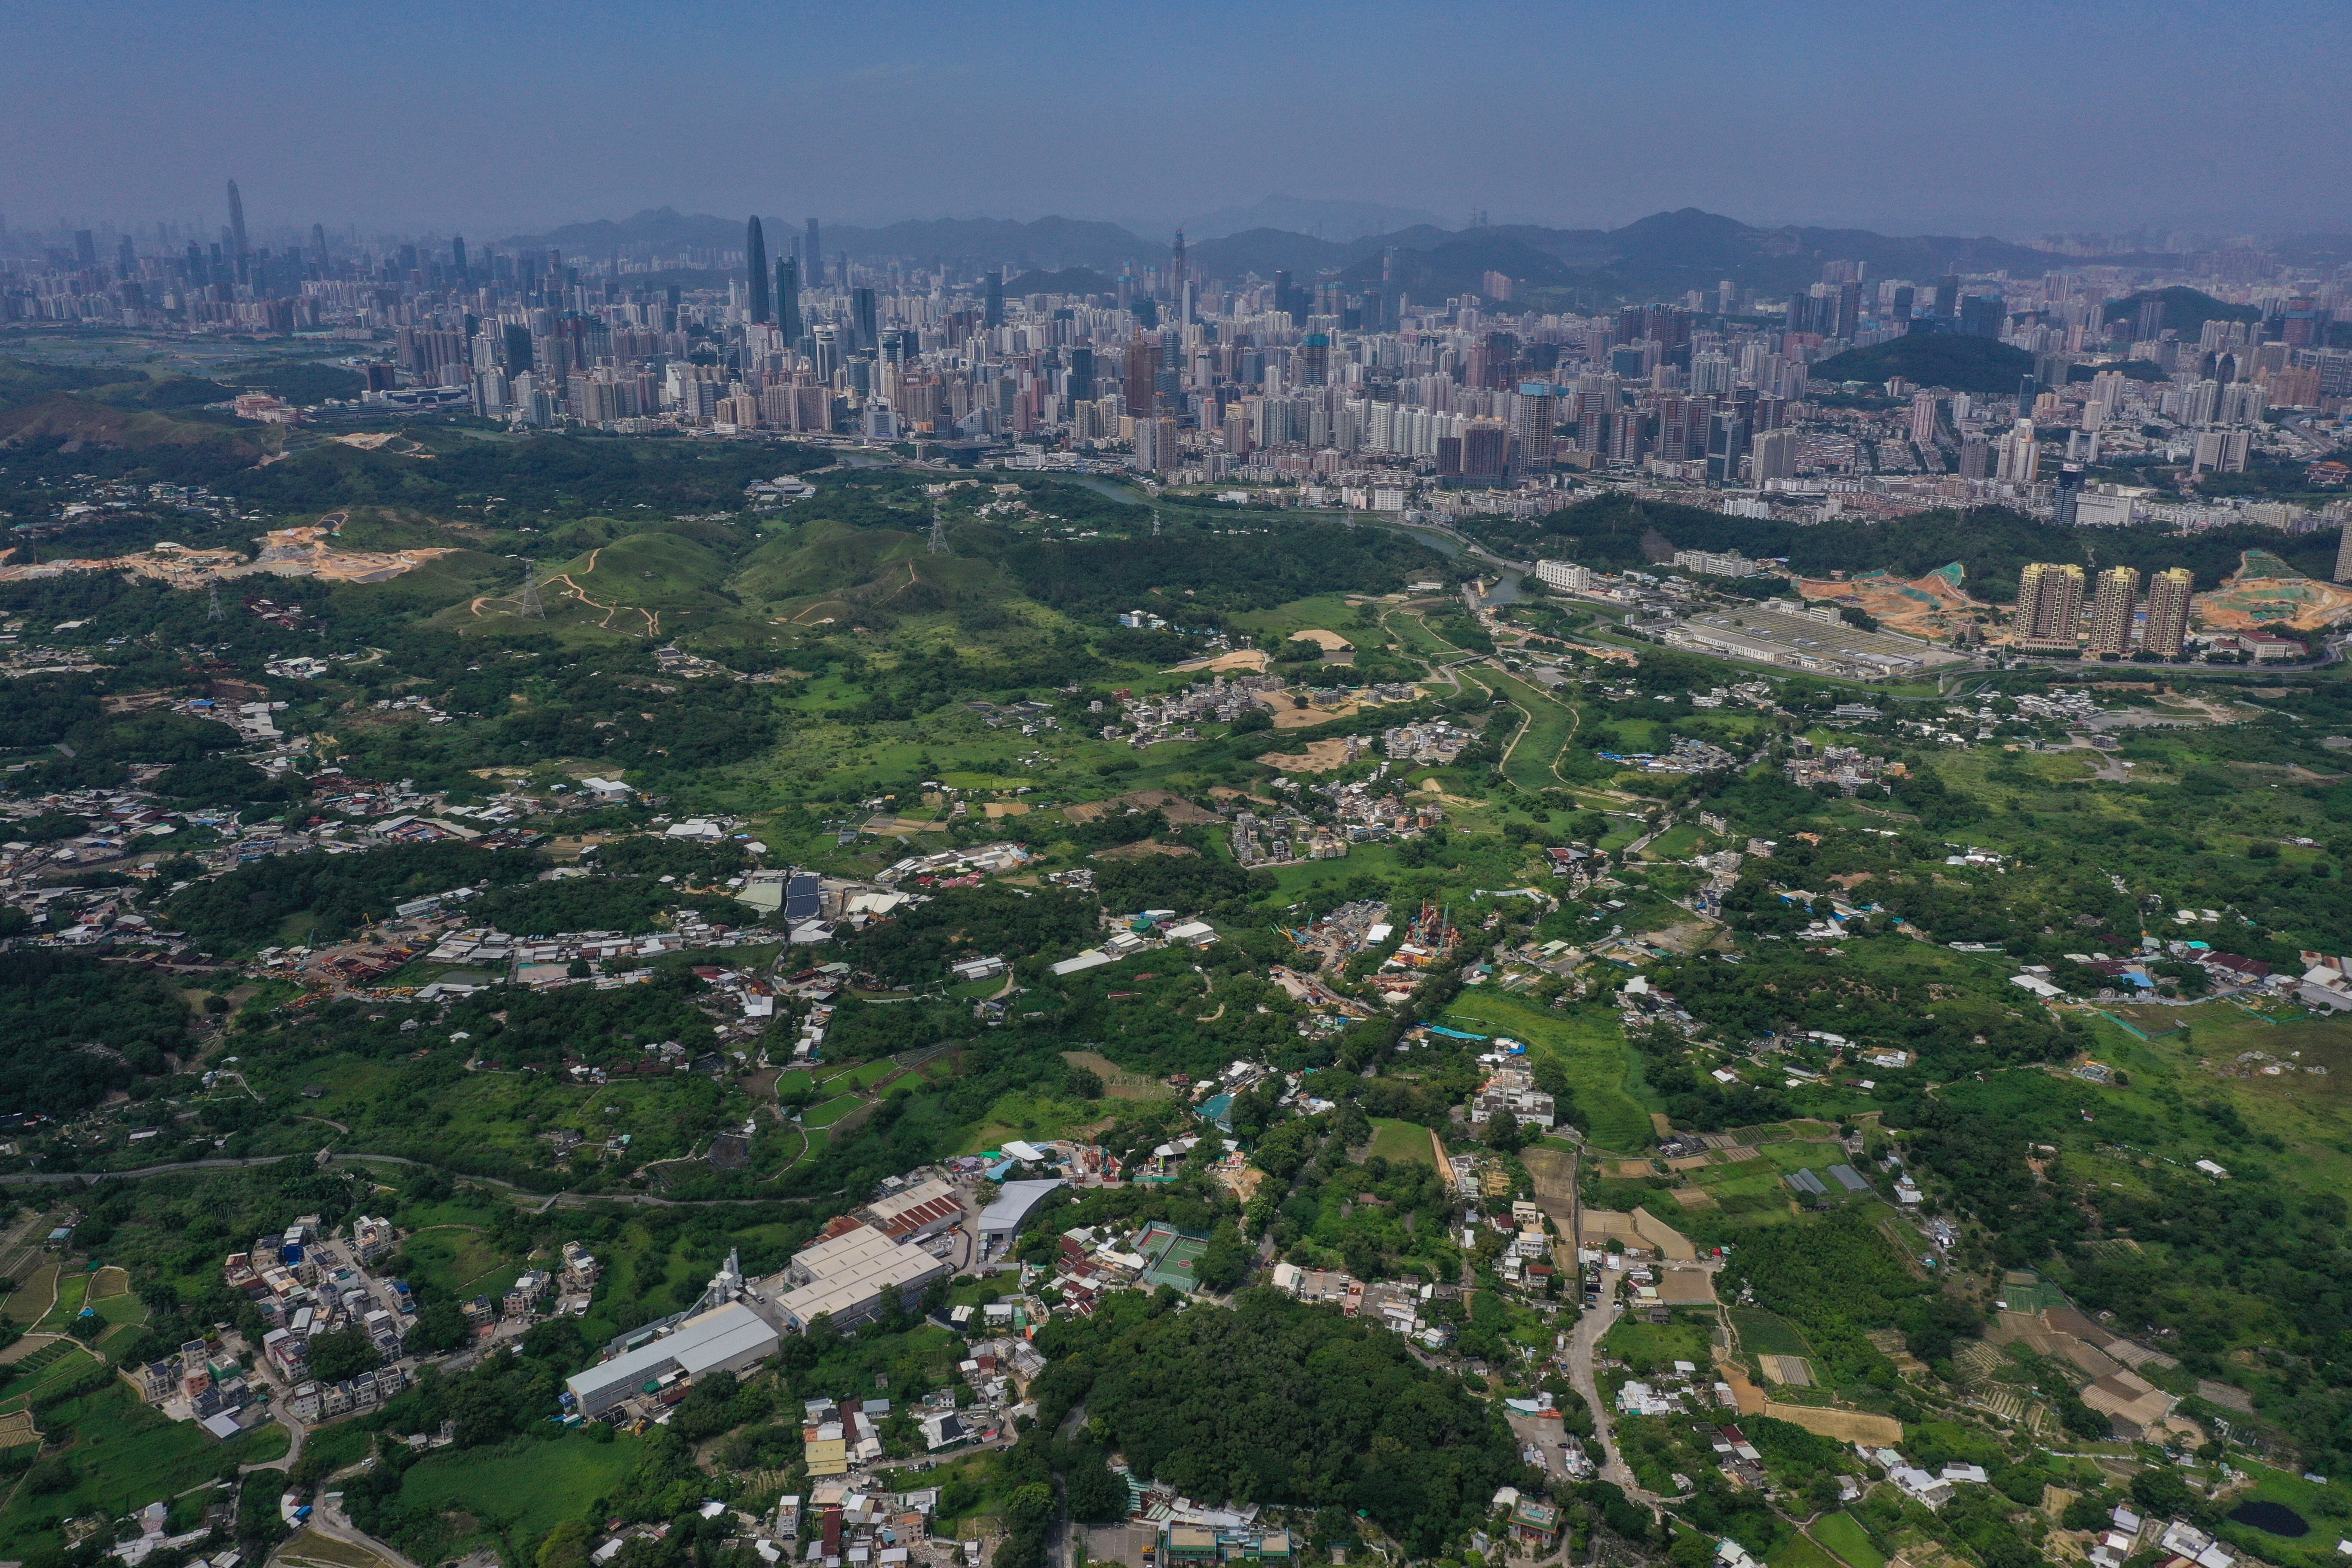 Hong Kong is planning to develop the northern New Territories, pictured with Shenzhen in the distance. Photo: Winson Wong